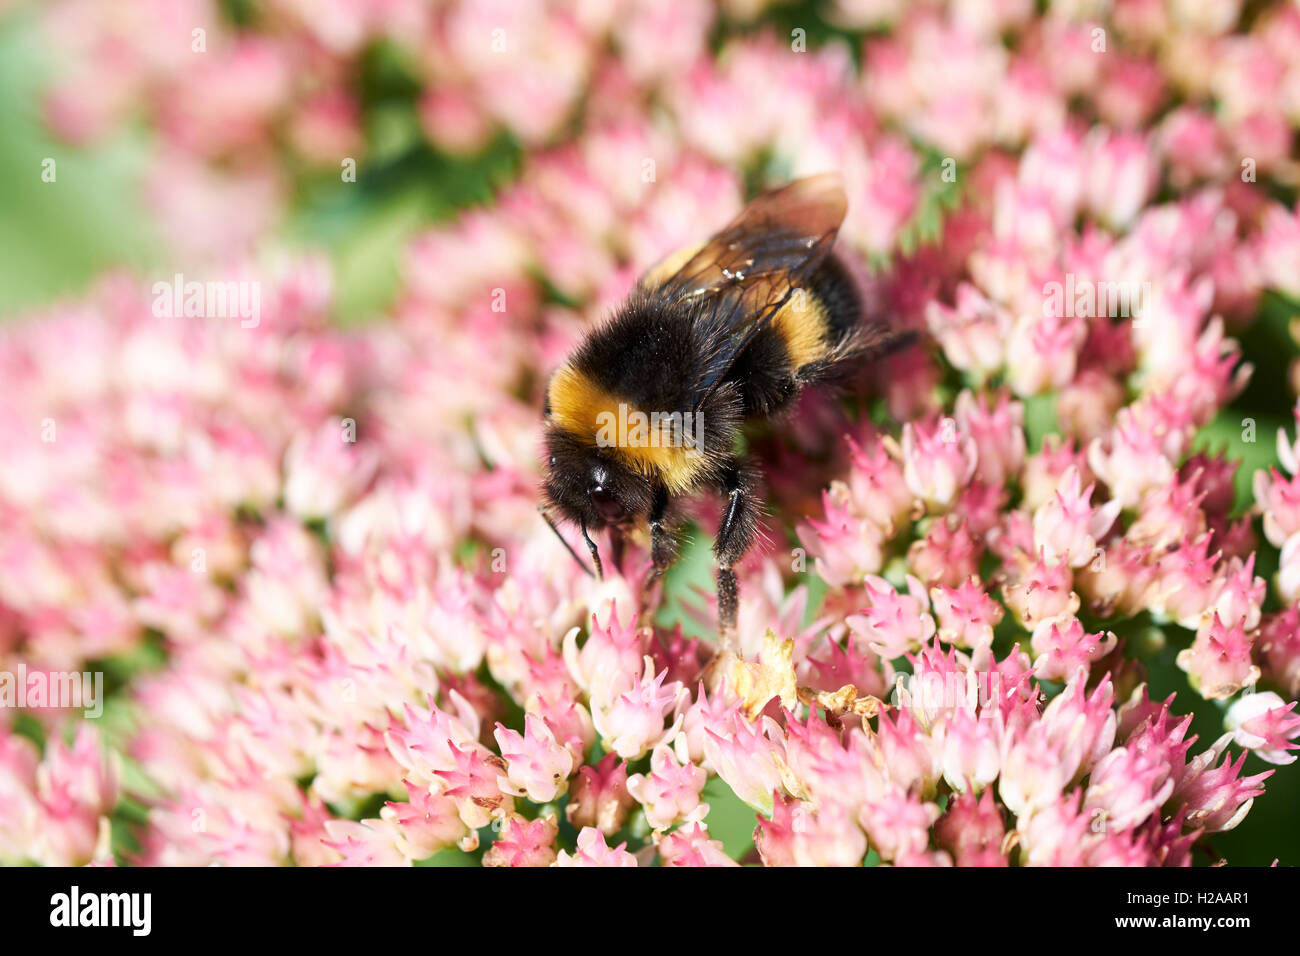 Buff-Tailed Bumble Bee (Bombus terrestris) collecting nectar from summer garden flowers. Stock Photo